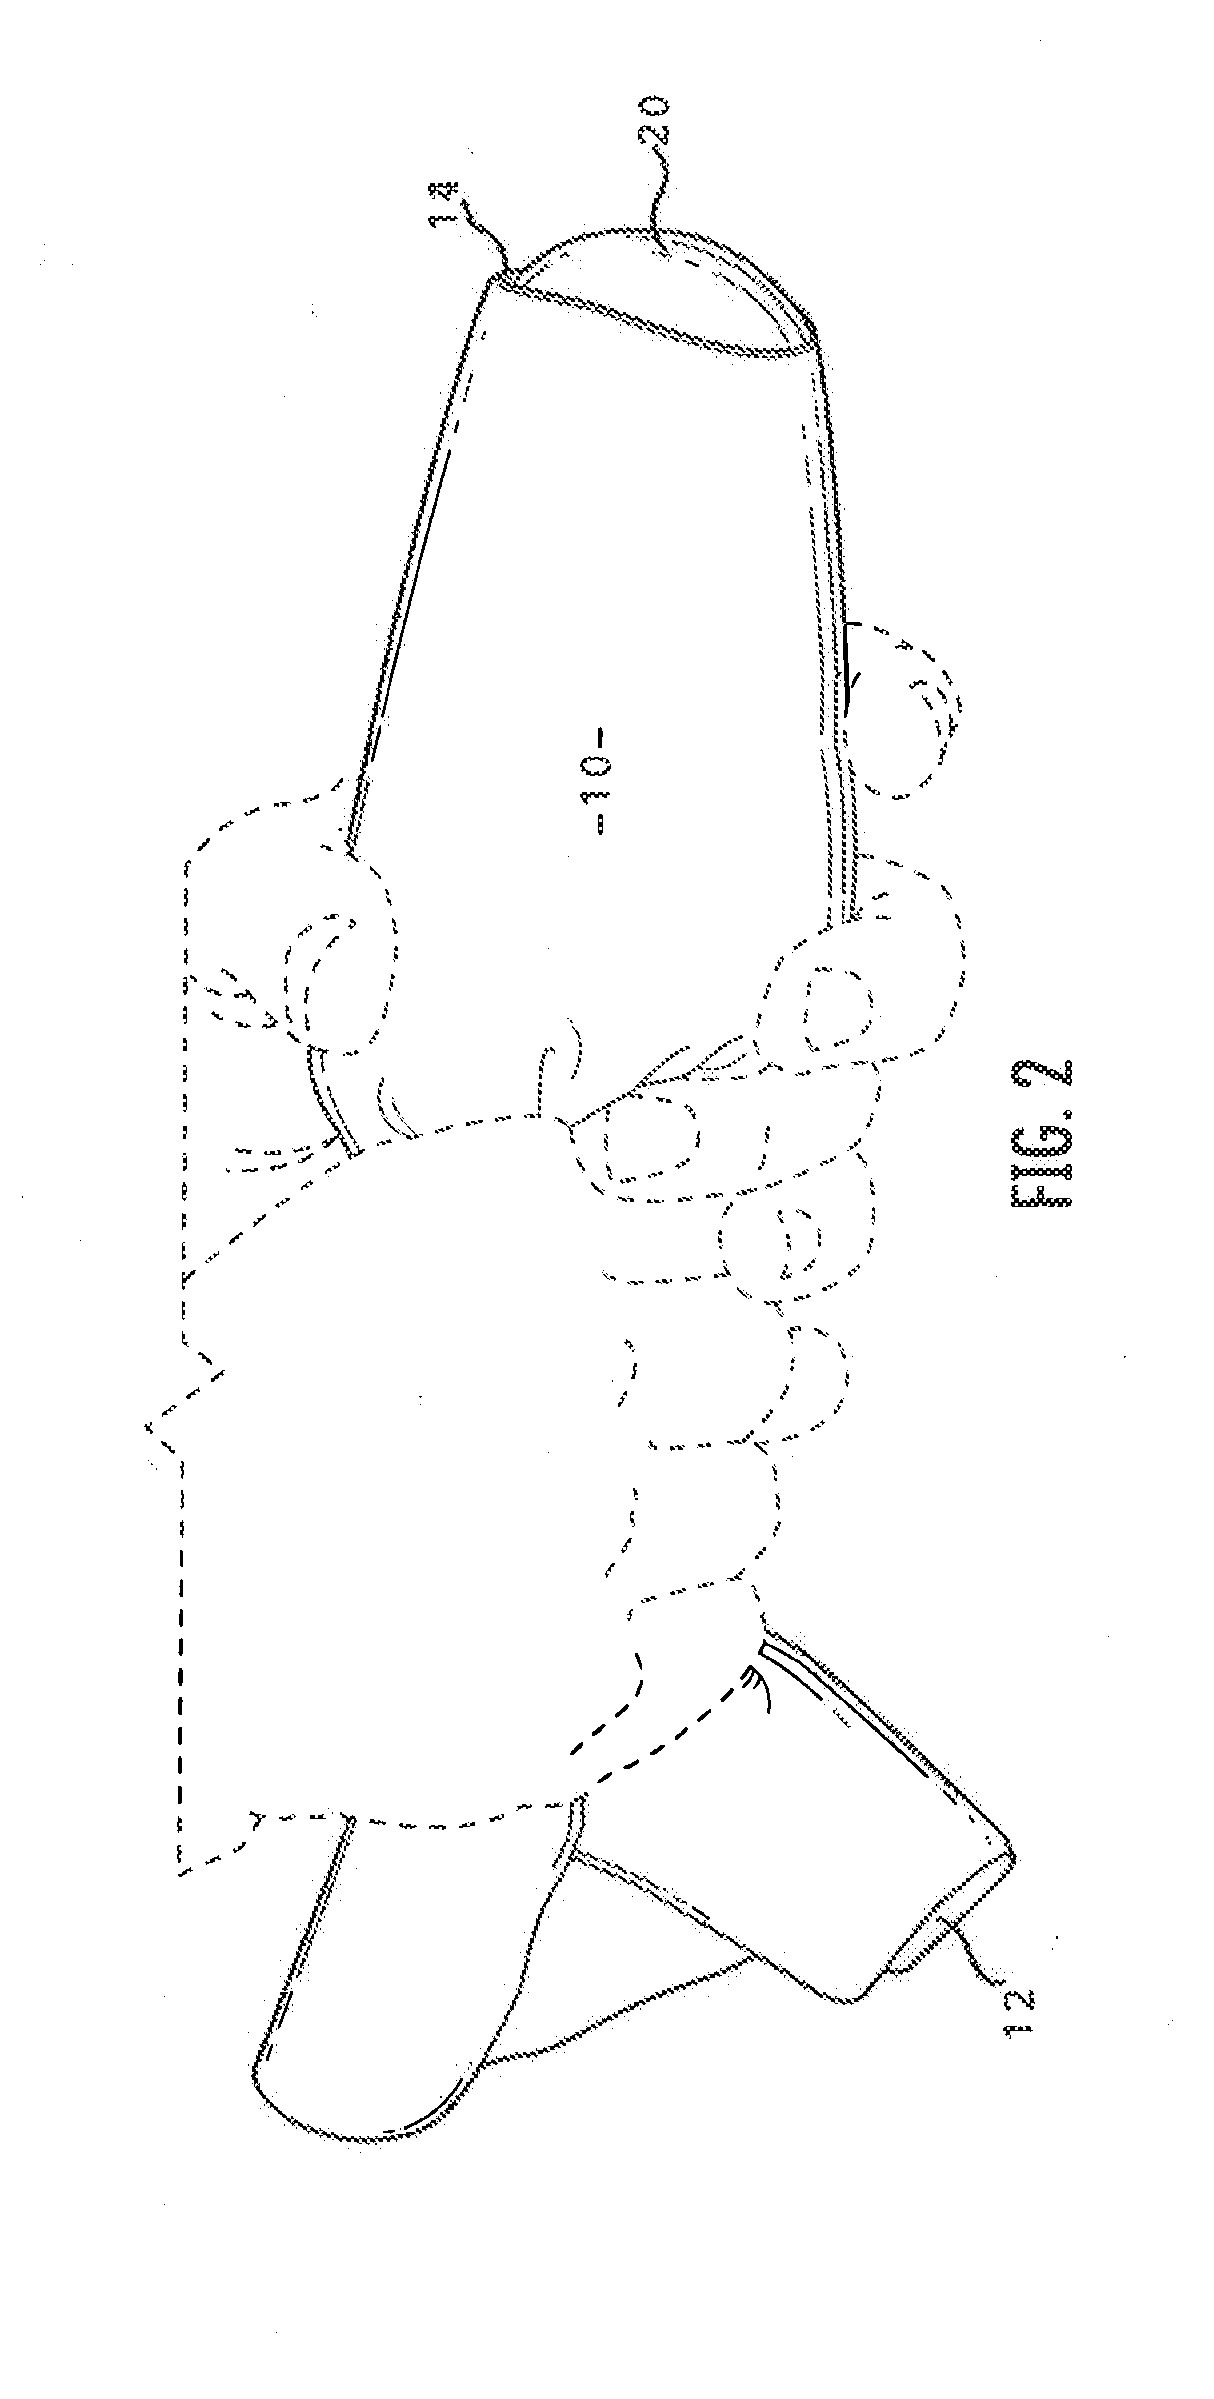 Apparatus and Process for Delivering a Silicone Prosthesis into a Surgical Pocket